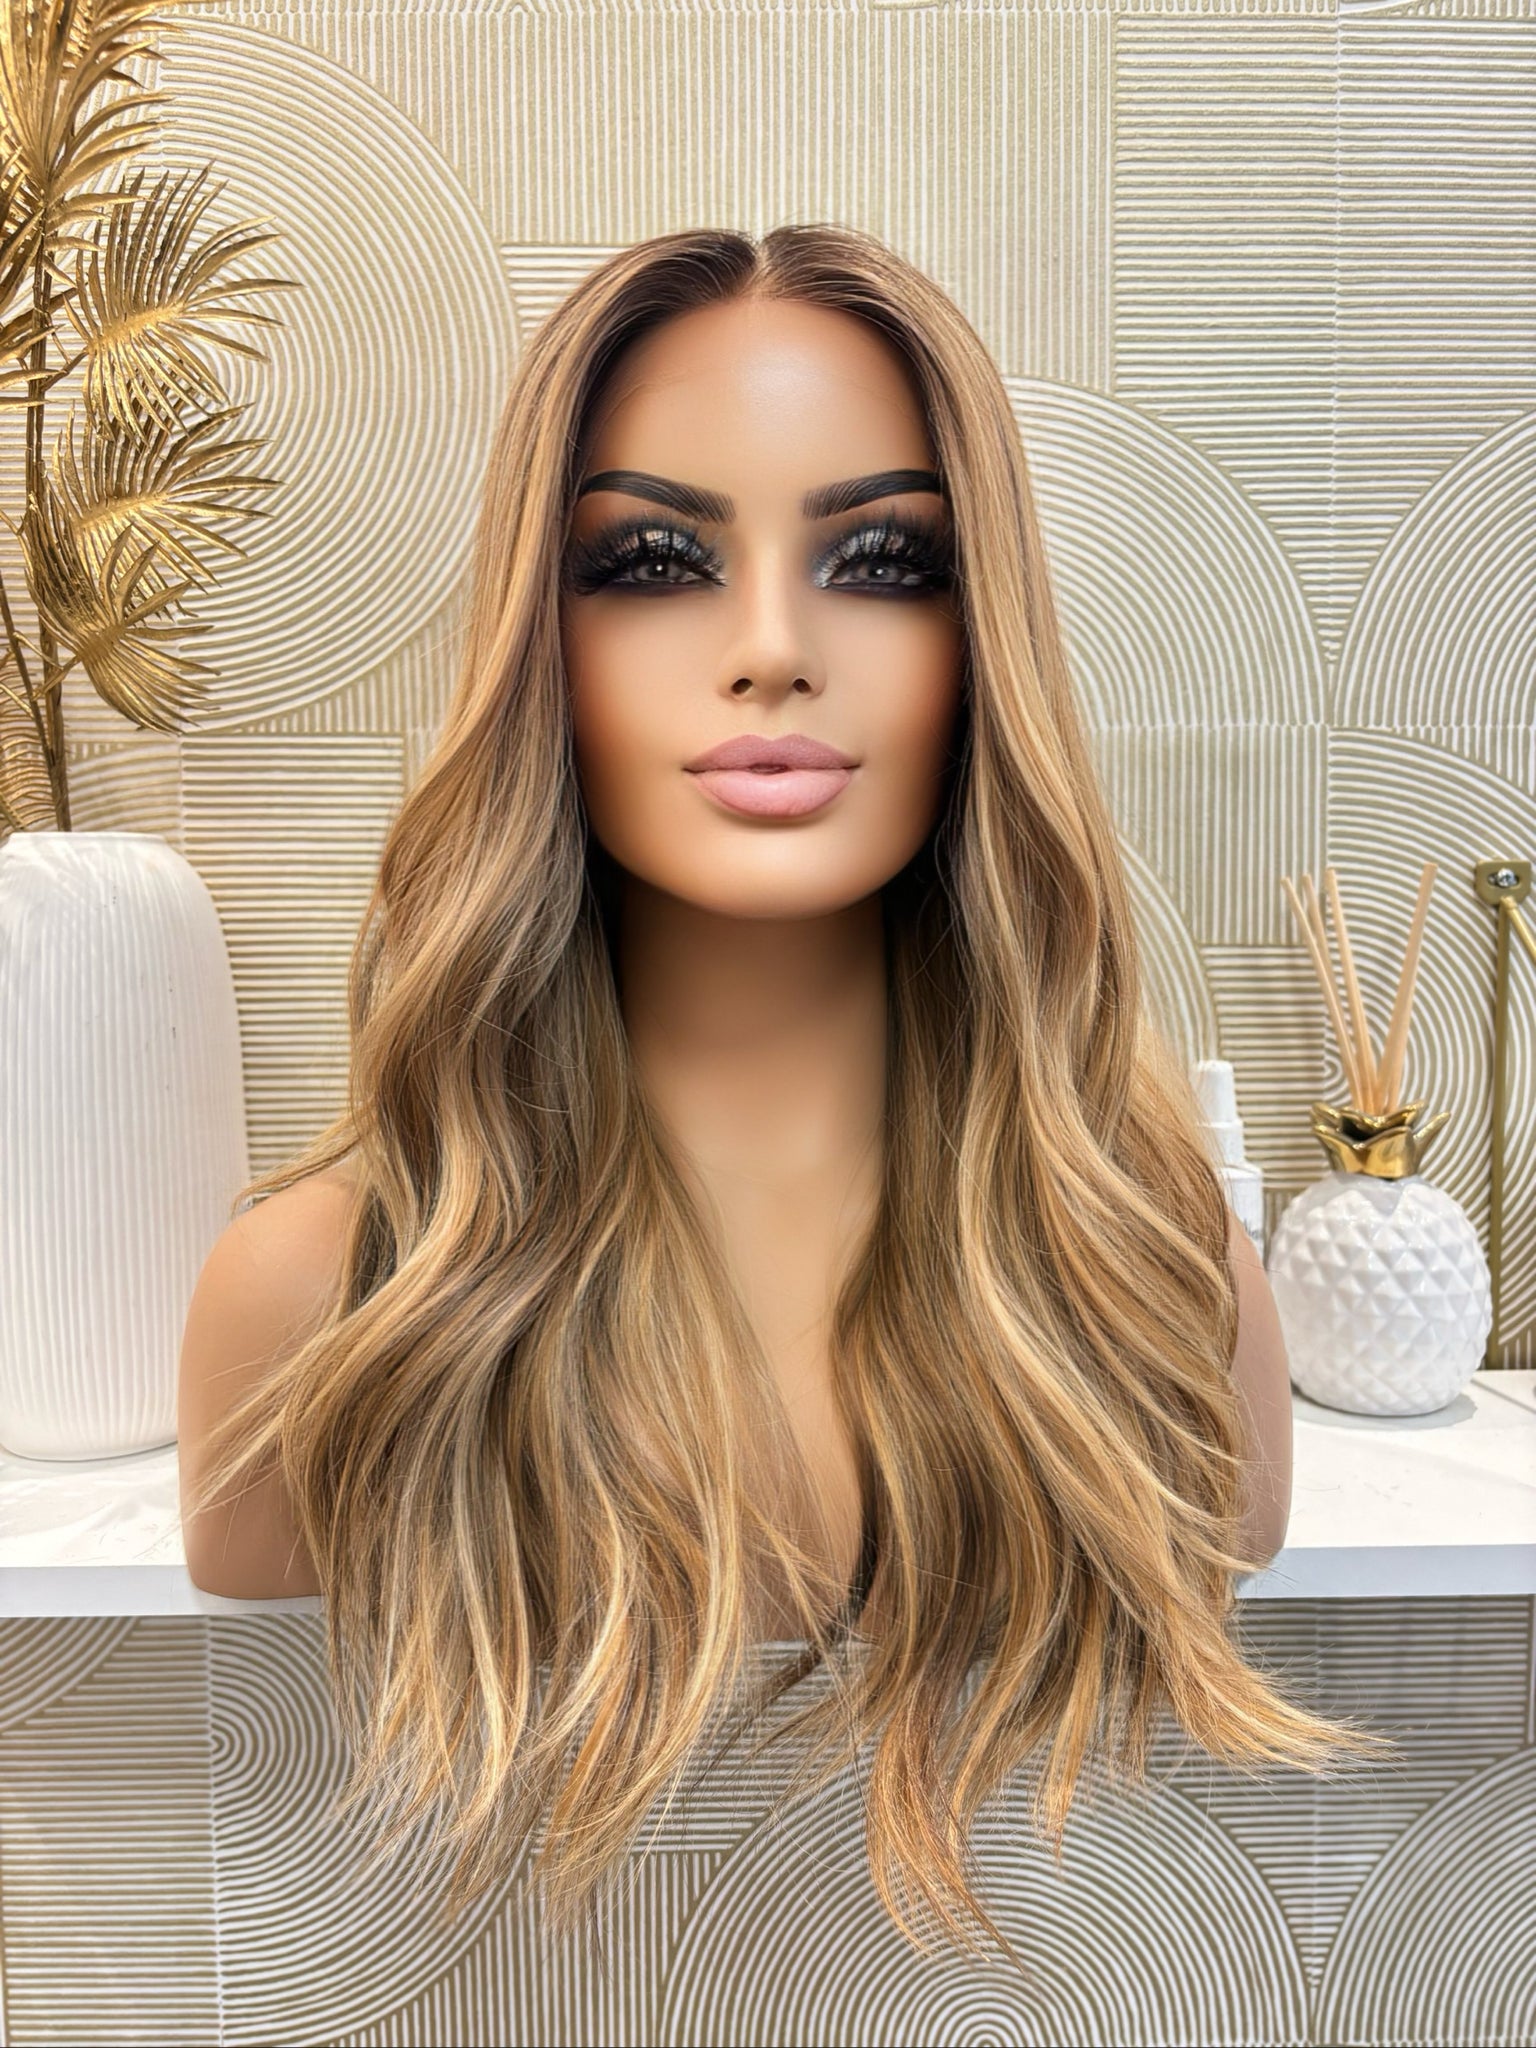 Clarissa - Integral + lace top  / 22 inch / 180 % Volume / Russian hair